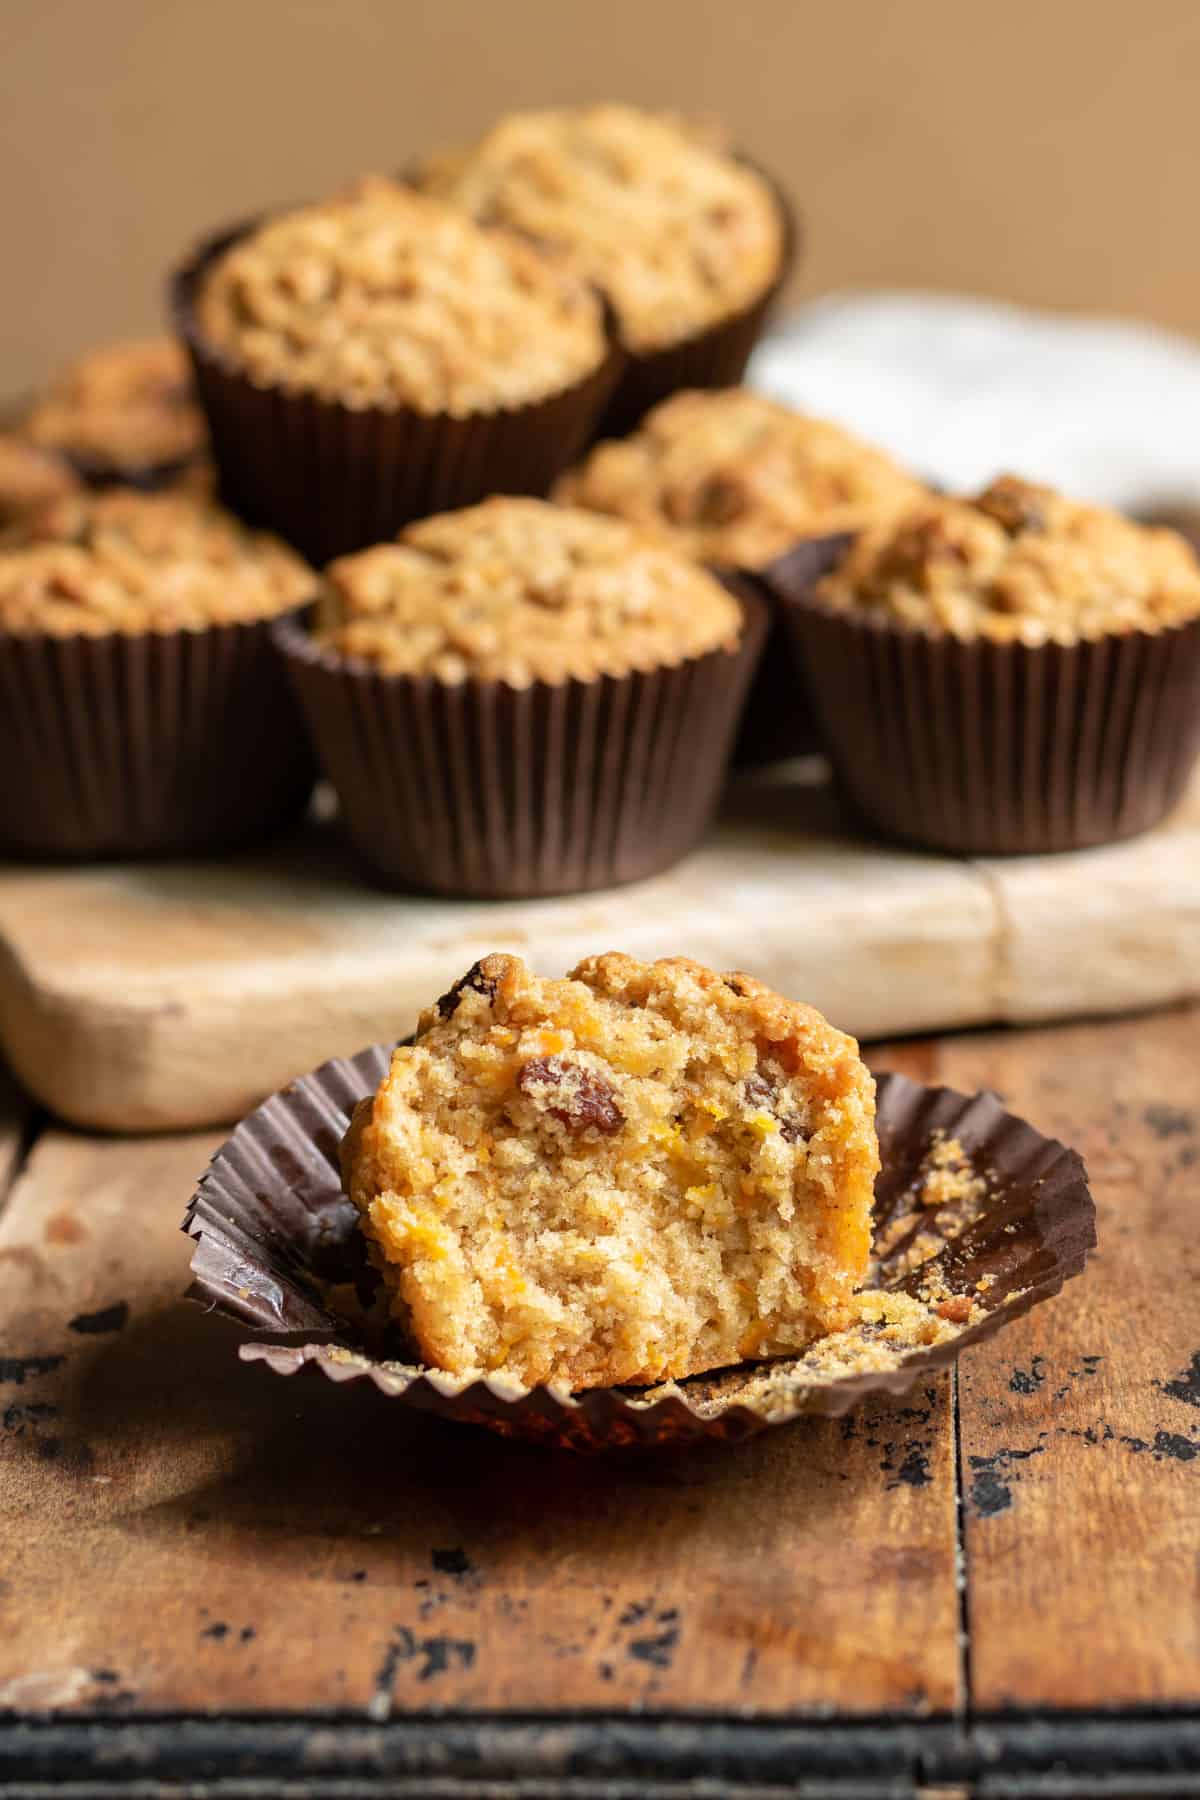 Muffin with a bite out.